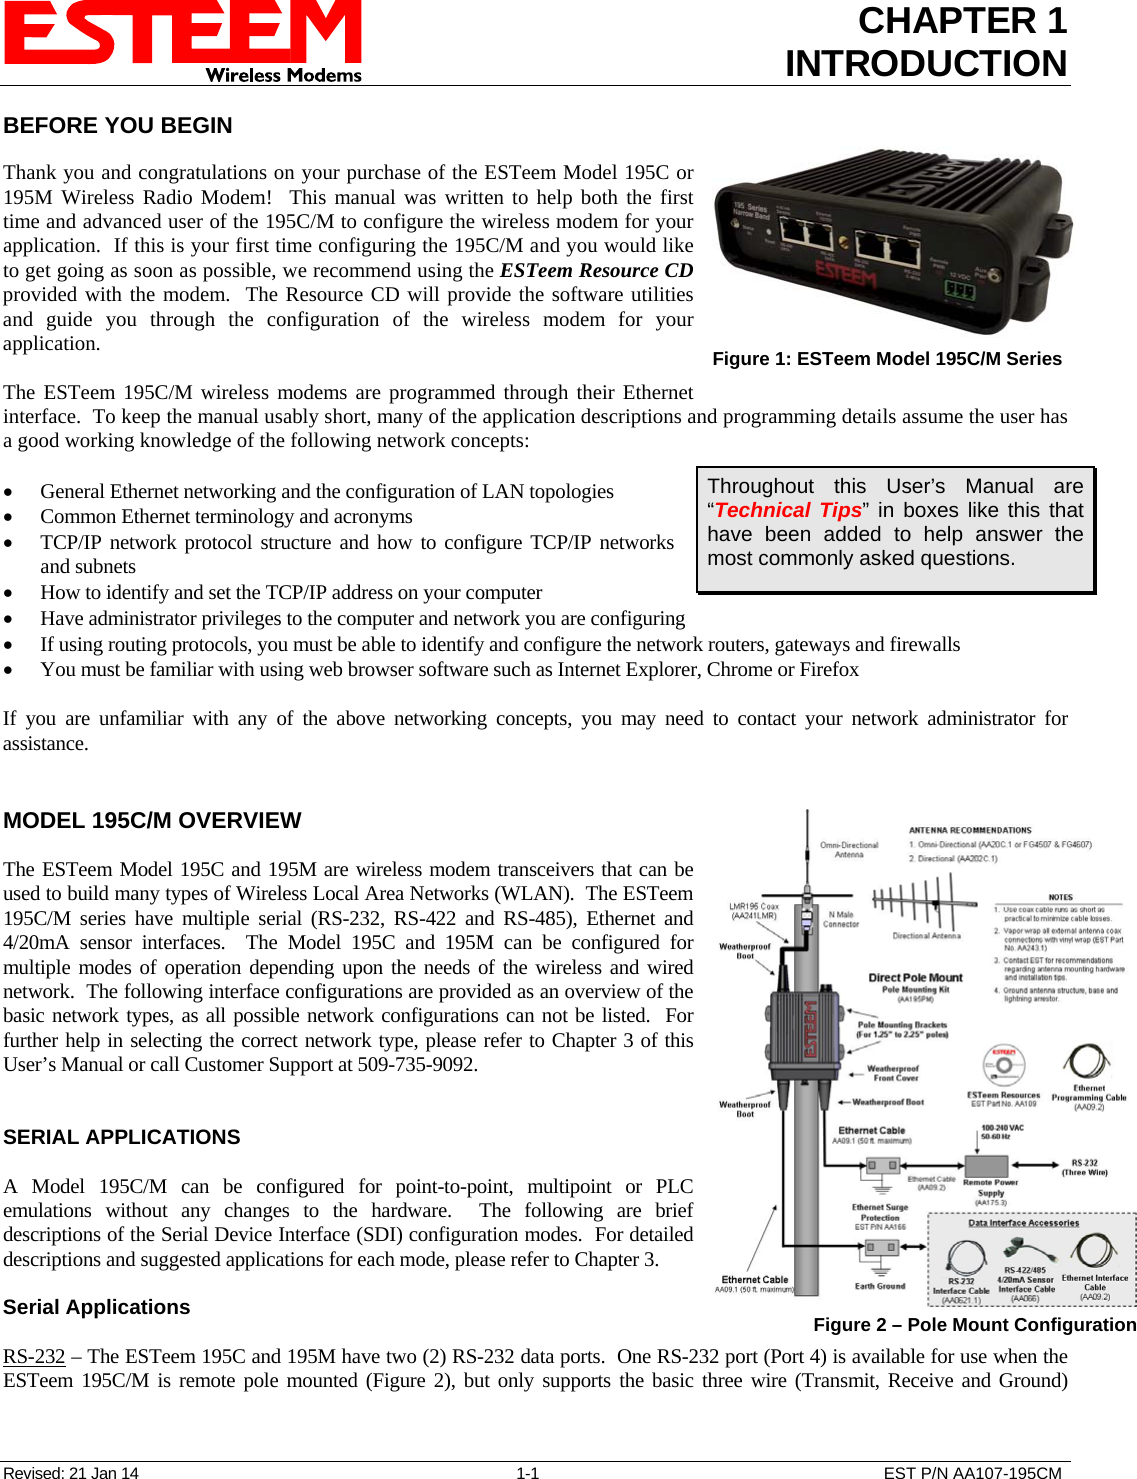 CHAPTER 1 INTRODUCTION  BEFORE YOU BEGIN  Thank you and congratulations on your purchase of the ESTeem Model 195C or 195M Wireless Radio Modem!  This manual was written to help both the first time and advanced user of the 195C/M to configure the wireless modem for your application.  If this is your first time configuring the 195C/M and you would like to get going as soon as possible, we recommend using the ESTeem Resource CD provided with the modem.  The Resource CD will provide the software utilities and guide you through the configuration of the wireless modem for your application. Revised: 21 Jan 14  1-1  EST P/N AA107-195CM  The ESTeem 195C/M wireless modems are programmed through their Ethernet interface.  To keep the manual usably short, many of the application descriptions and programming details assume the user has a good working knowledge of the following network concepts:  Figure 1: ESTeem Model 195C/M Series    General Ethernet networking and the configuration of LAN topologies   Common Ethernet terminology and acronyms  TCP/IP network protocol structure and how to configure TCP/IP networks and subnets Throughout this User’s Manual are “Technical Tips” in boxes like this that have been added to help answer the most commonly asked questions.  How to identify and set the TCP/IP address on your computer  Have administrator privileges to the computer and network you are configuring  If using routing protocols, you must be able to identify and configure the network routers, gateways and firewalls  You must be familiar with using web browser software such as Internet Explorer, Chrome or Firefox  If you are unfamiliar with any of the above networking concepts, you may need to contact your network administrator for assistance.   MODEL 195C/M OVERVIEW  The ESTeem Model 195C and 195M are wireless modem transceivers that can be used to build many types of Wireless Local Area Networks (WLAN).  The ESTeem 195C/M series have multiple serial (RS-232, RS-422 and RS-485), Ethernet and 4/20mA sensor interfaces.  The Model 195C and 195M can be configured for multiple modes of operation depending upon the needs of the wireless and wired network.  The following interface configurations are provided as an overview of the basic network types, as all possible network configurations can not be listed.  For further help in selecting the correct network type, please refer to Chapter 3 of this User’s Manual or call Customer Support at 509-735-9092.    SERIAL APPLICATIONS  A Model 195C/M can be configured for point-to-point, multipoint or PLC emulations without any changes to the hardware.  The following are brief descriptions of the Serial Device Interface (SDI) configuration modes.  For detailed descriptions and suggested applications for each mode, please refer to Chapter 3.  Figure 2 – Pole Mount Configuration  Serial Applications  RS-232 – The ESTeem 195C and 195M have two (2) RS-232 data ports.  One RS-232 port (Port 4) is available for use when the ESTeem 195C/M is remote pole mounted (Figure 2), but only supports the basic three wire (Transmit, Receive and Ground) 